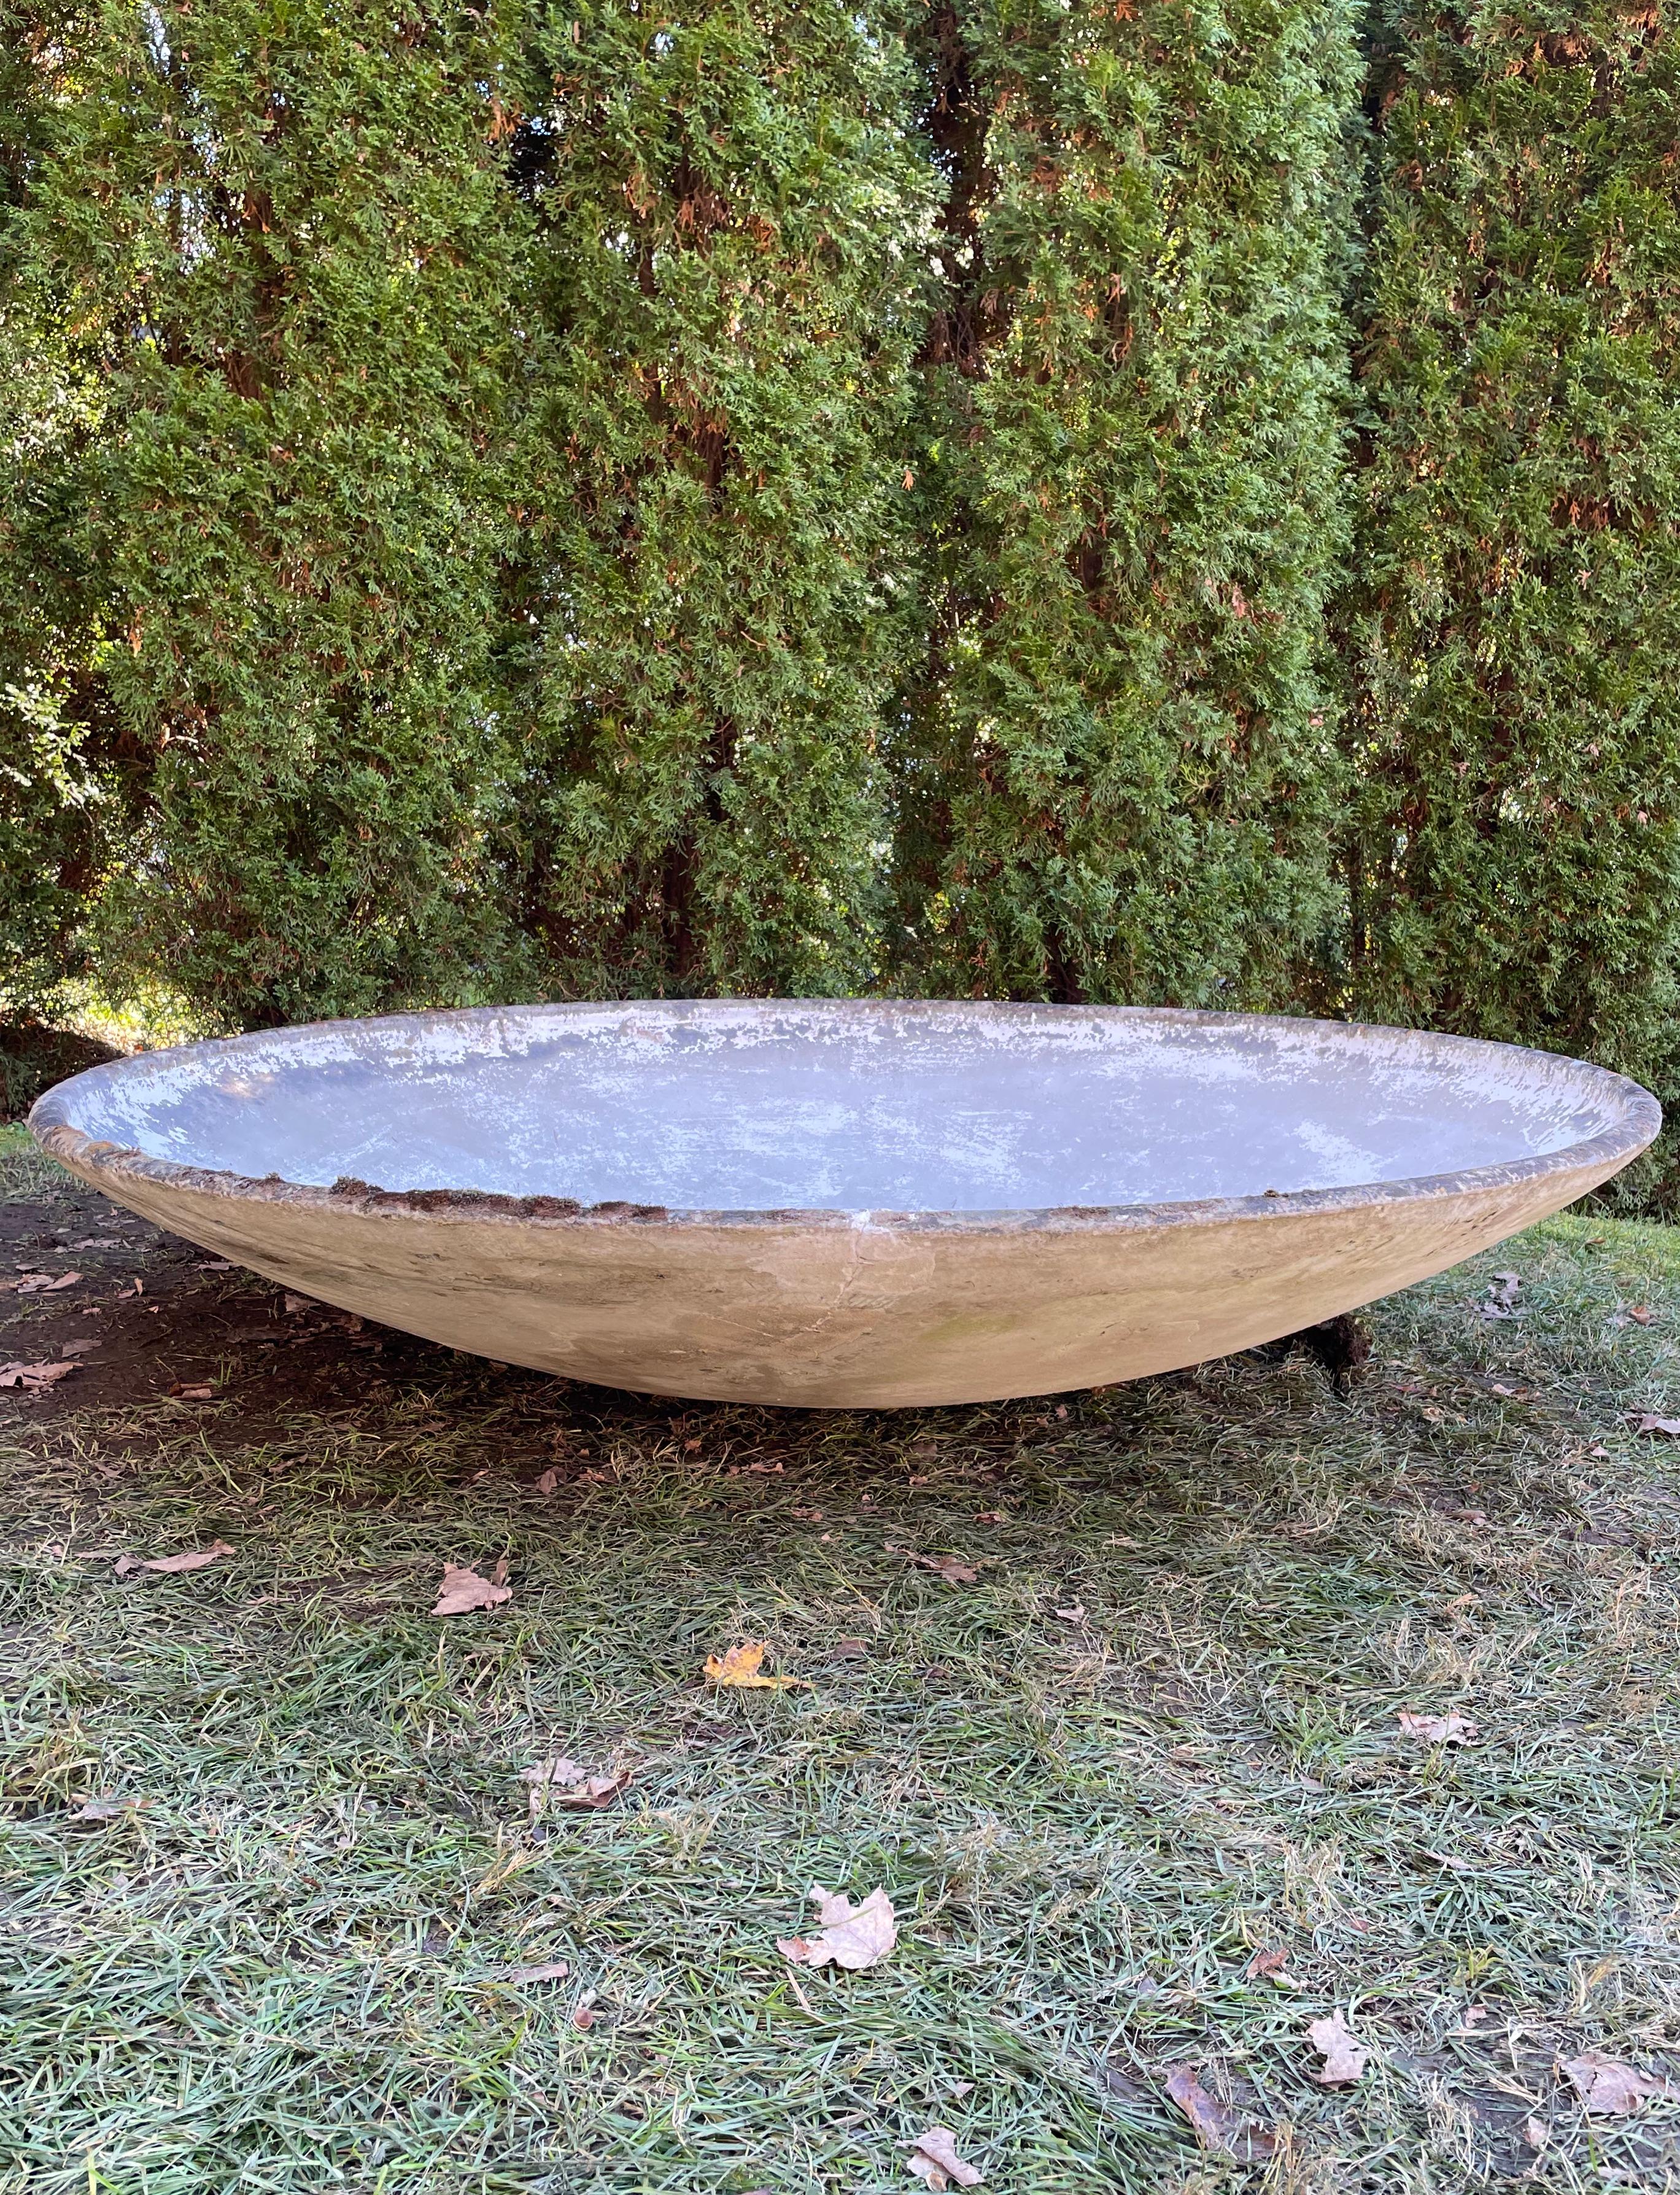 Designed by the iconic Willy Guhl in the 1960s and made of strong and lightweight fiber cement by Eternit, SA of Switzerland, these numbered saucer planters are impressive for their size and patina. One is in excellent condition with only a very